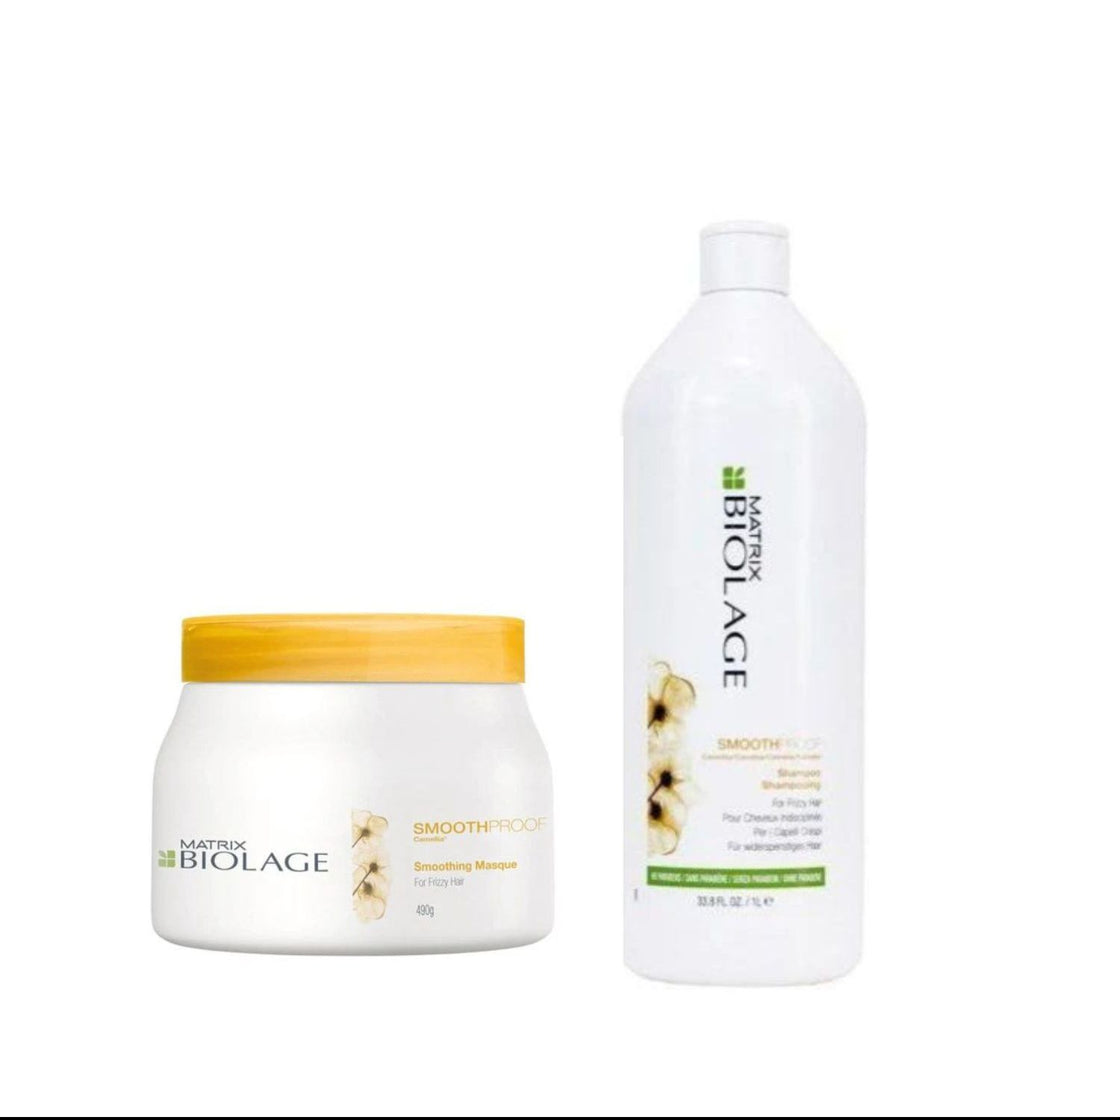 Matrix Biolage Smoothproof Smoothing Masque 490 Gm and Shampoo 1000 Ml Combo Pack of 2